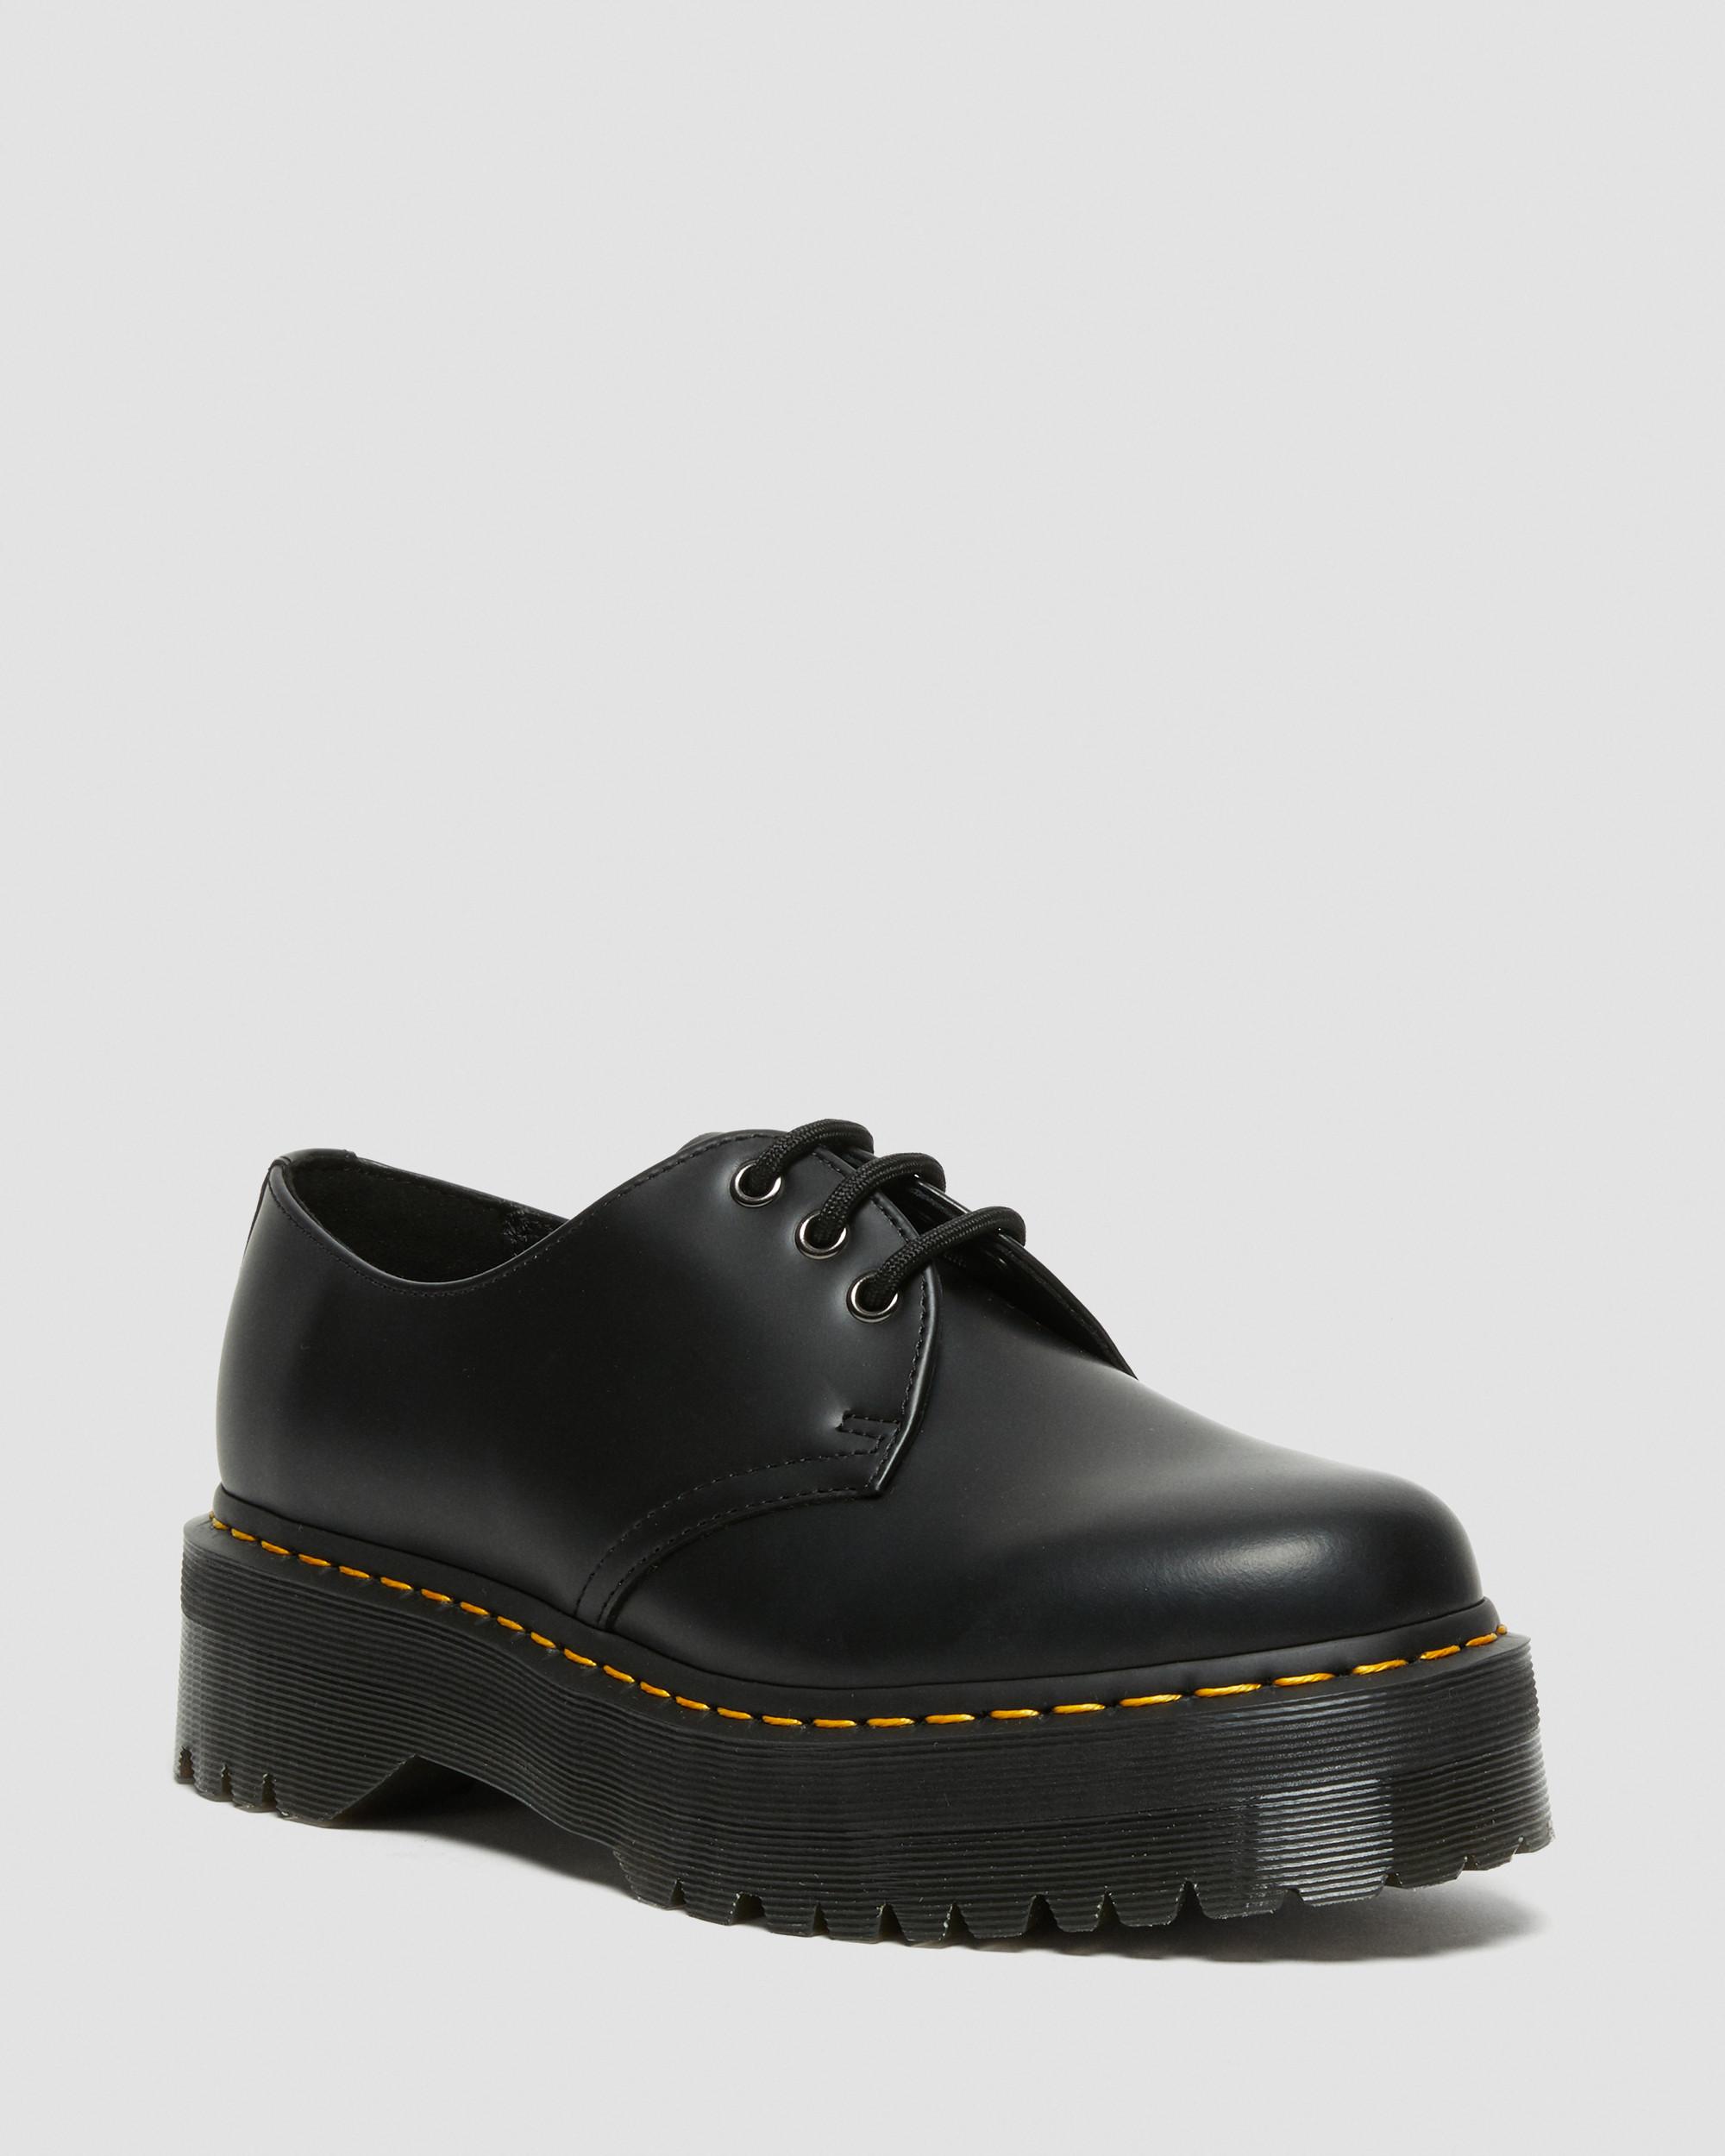 DR MARTENS 1461 Mono Smooth Leather Oxford Shoes